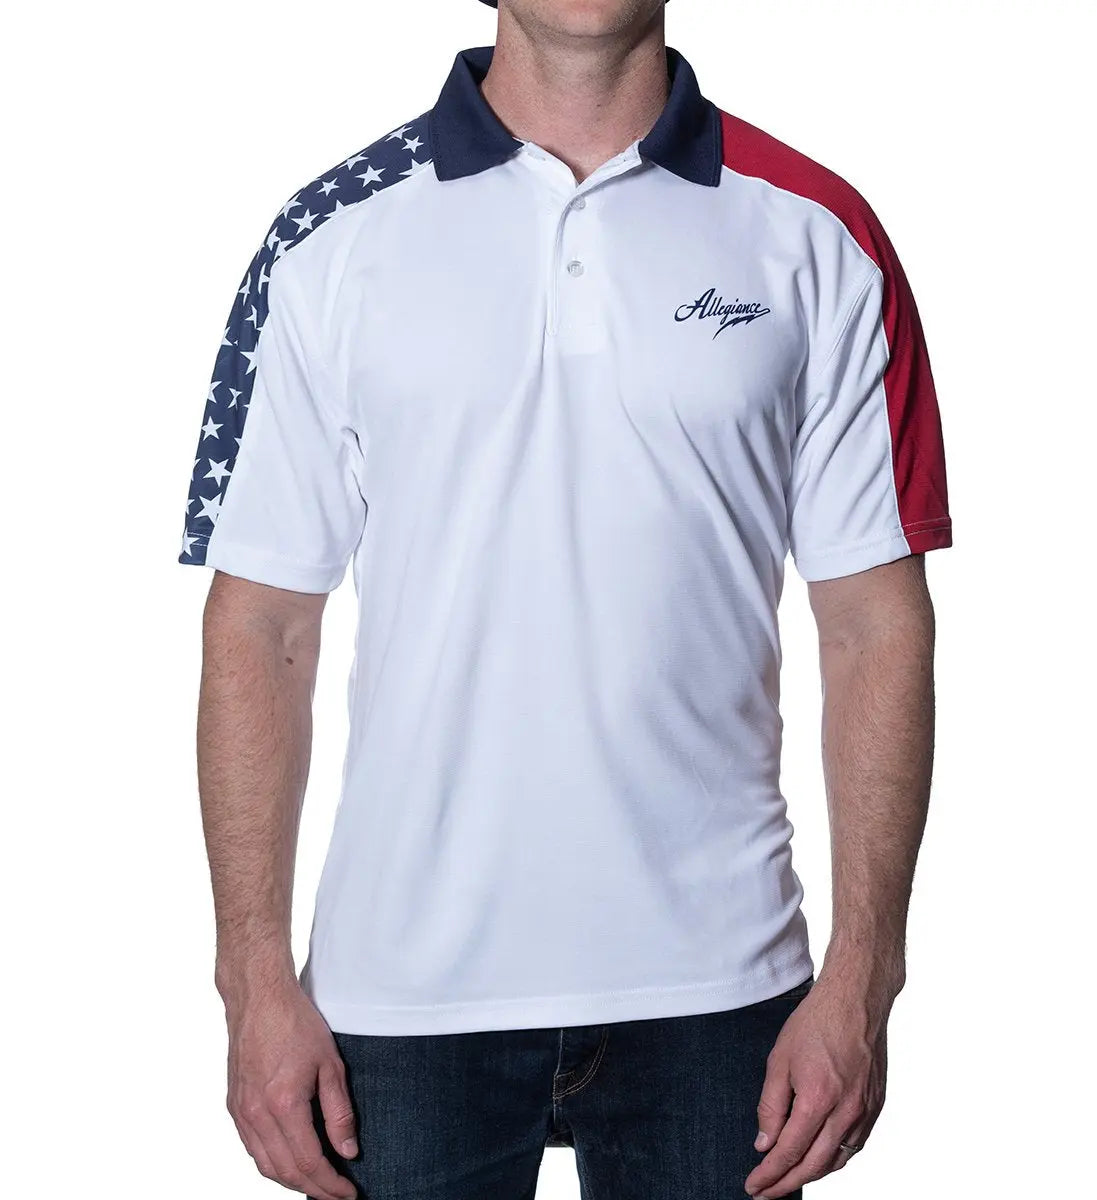 USA Classic Polo ALLEGIANCE CLOTHING